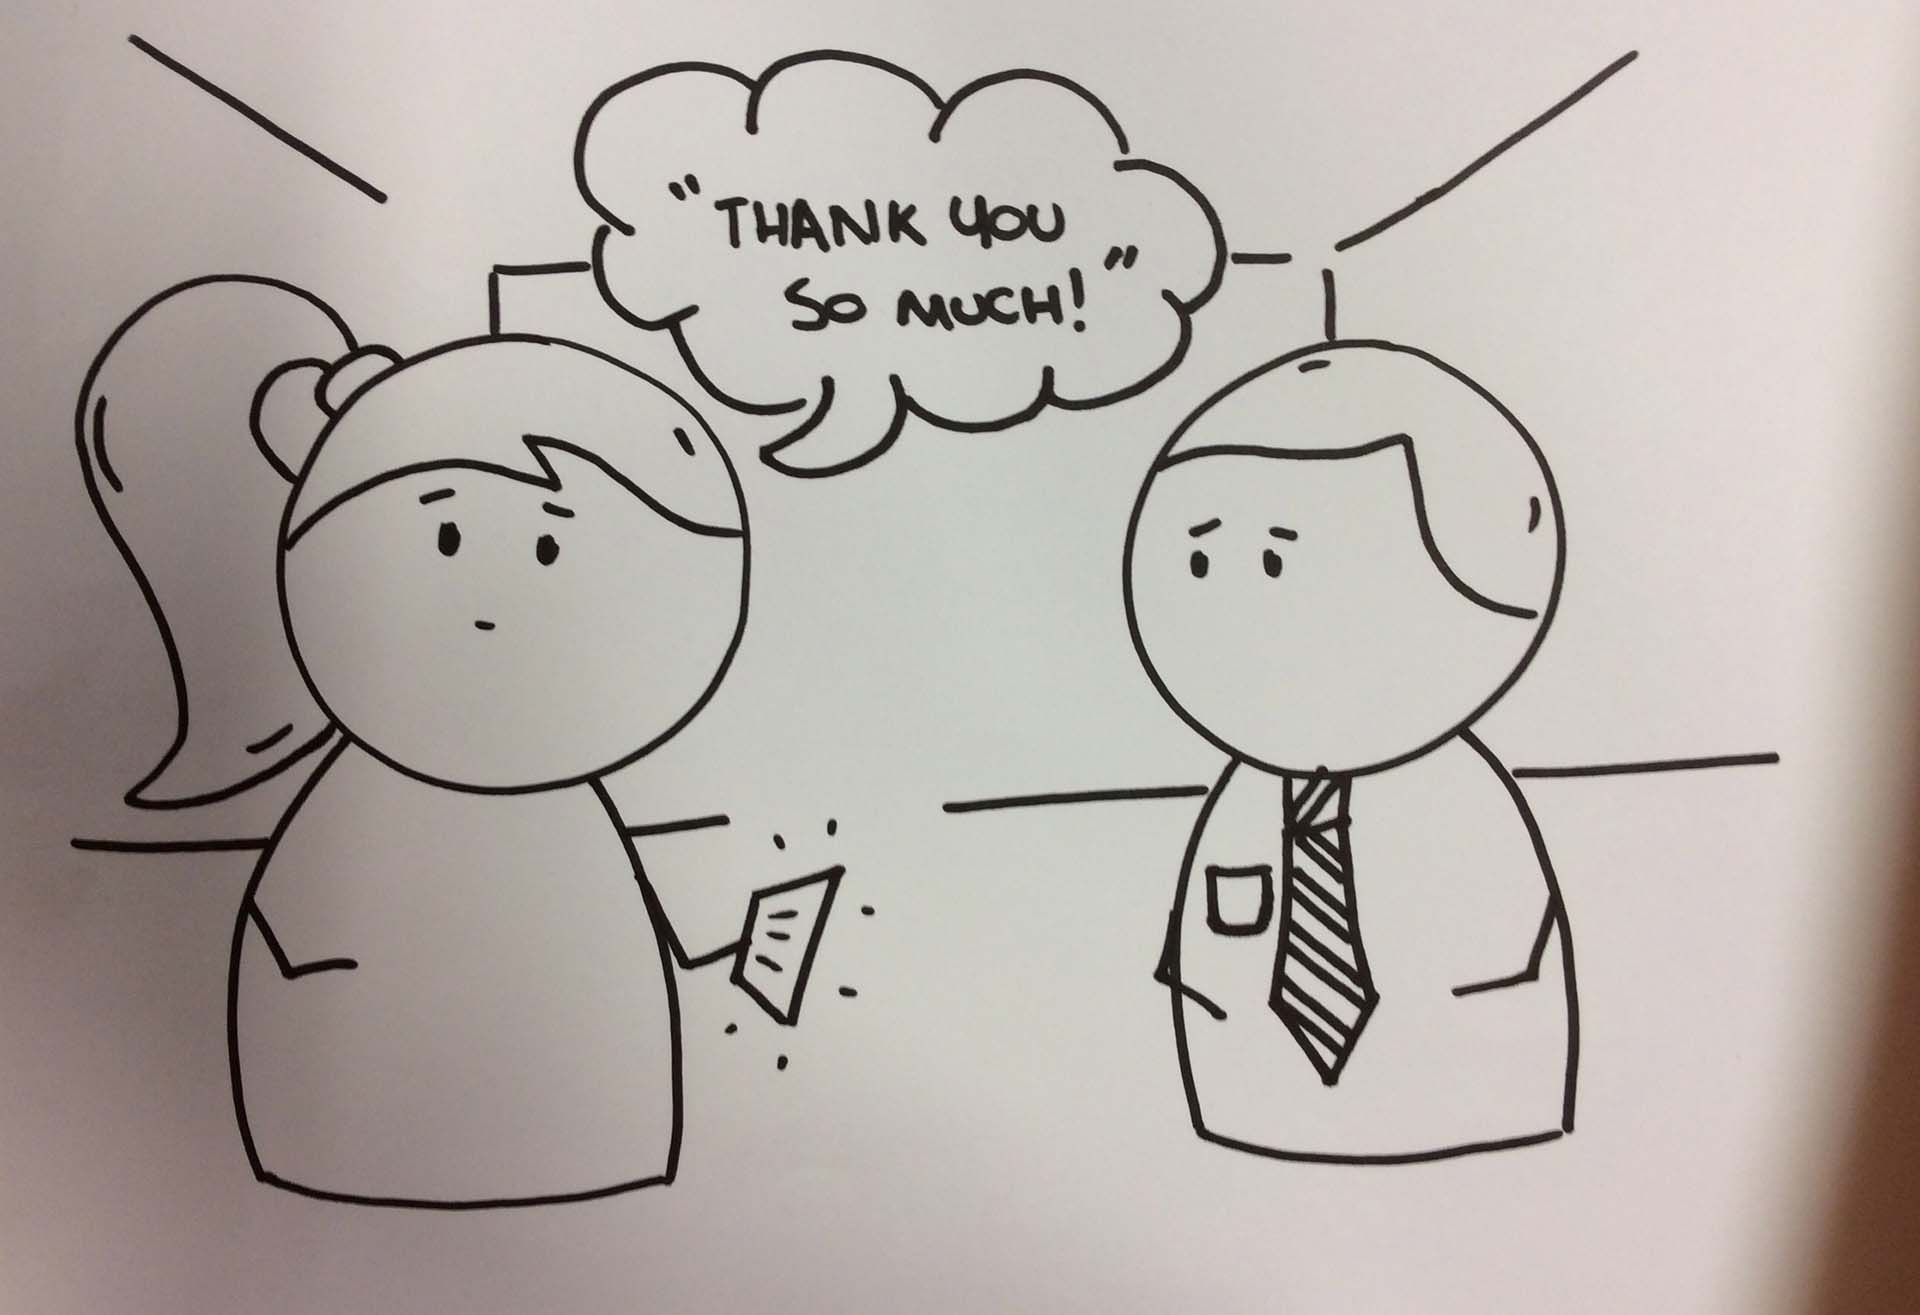 Cartoon graphic of a customer service interaction